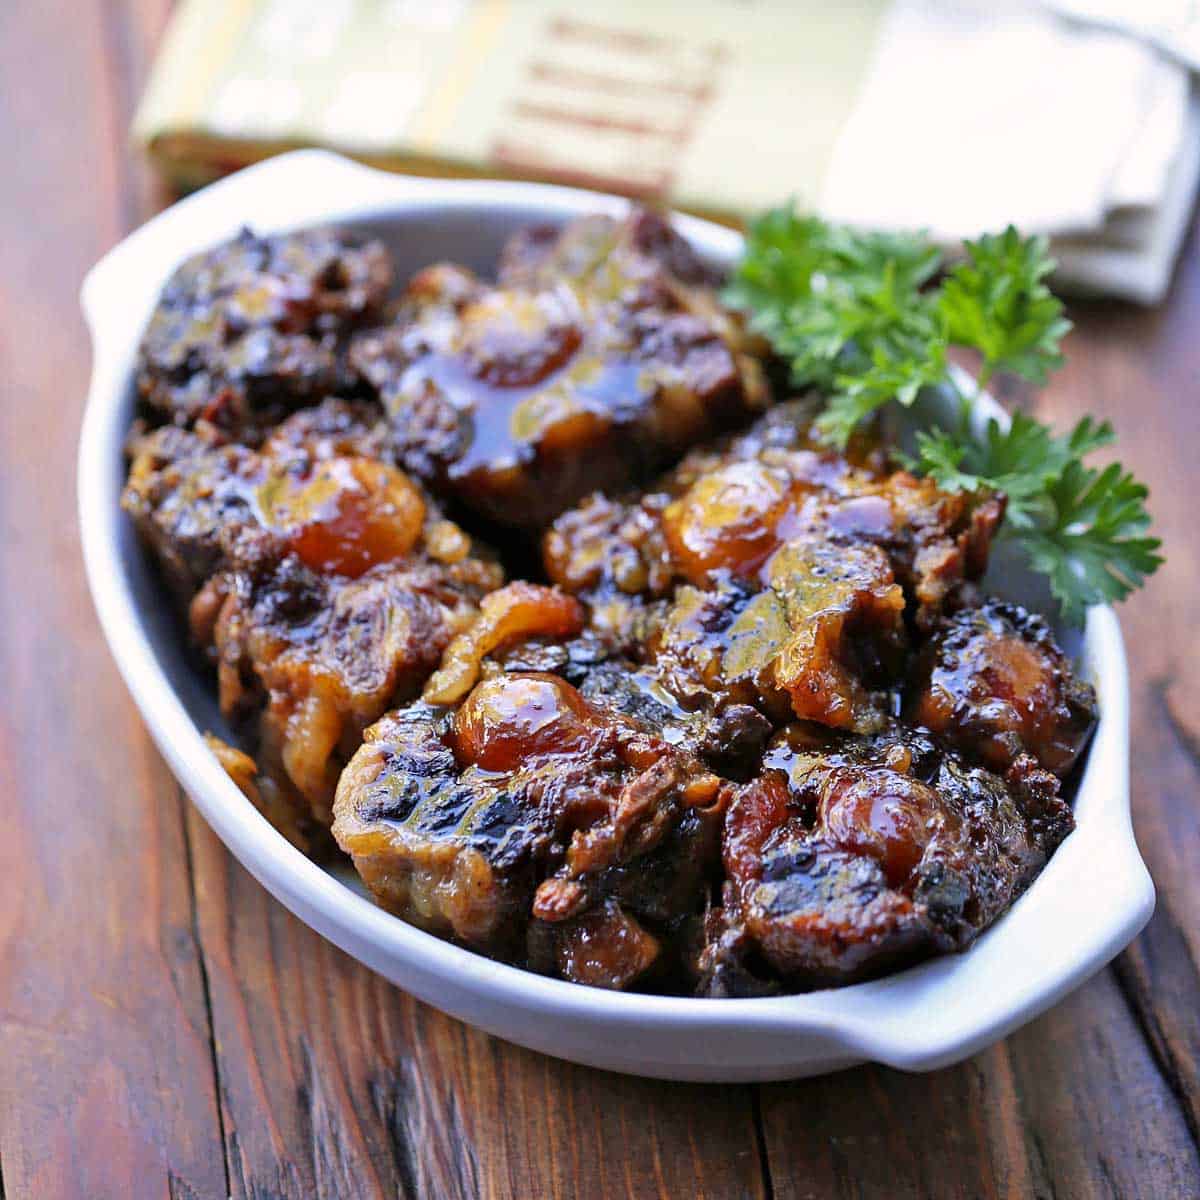 Slow Cooker Oxtails